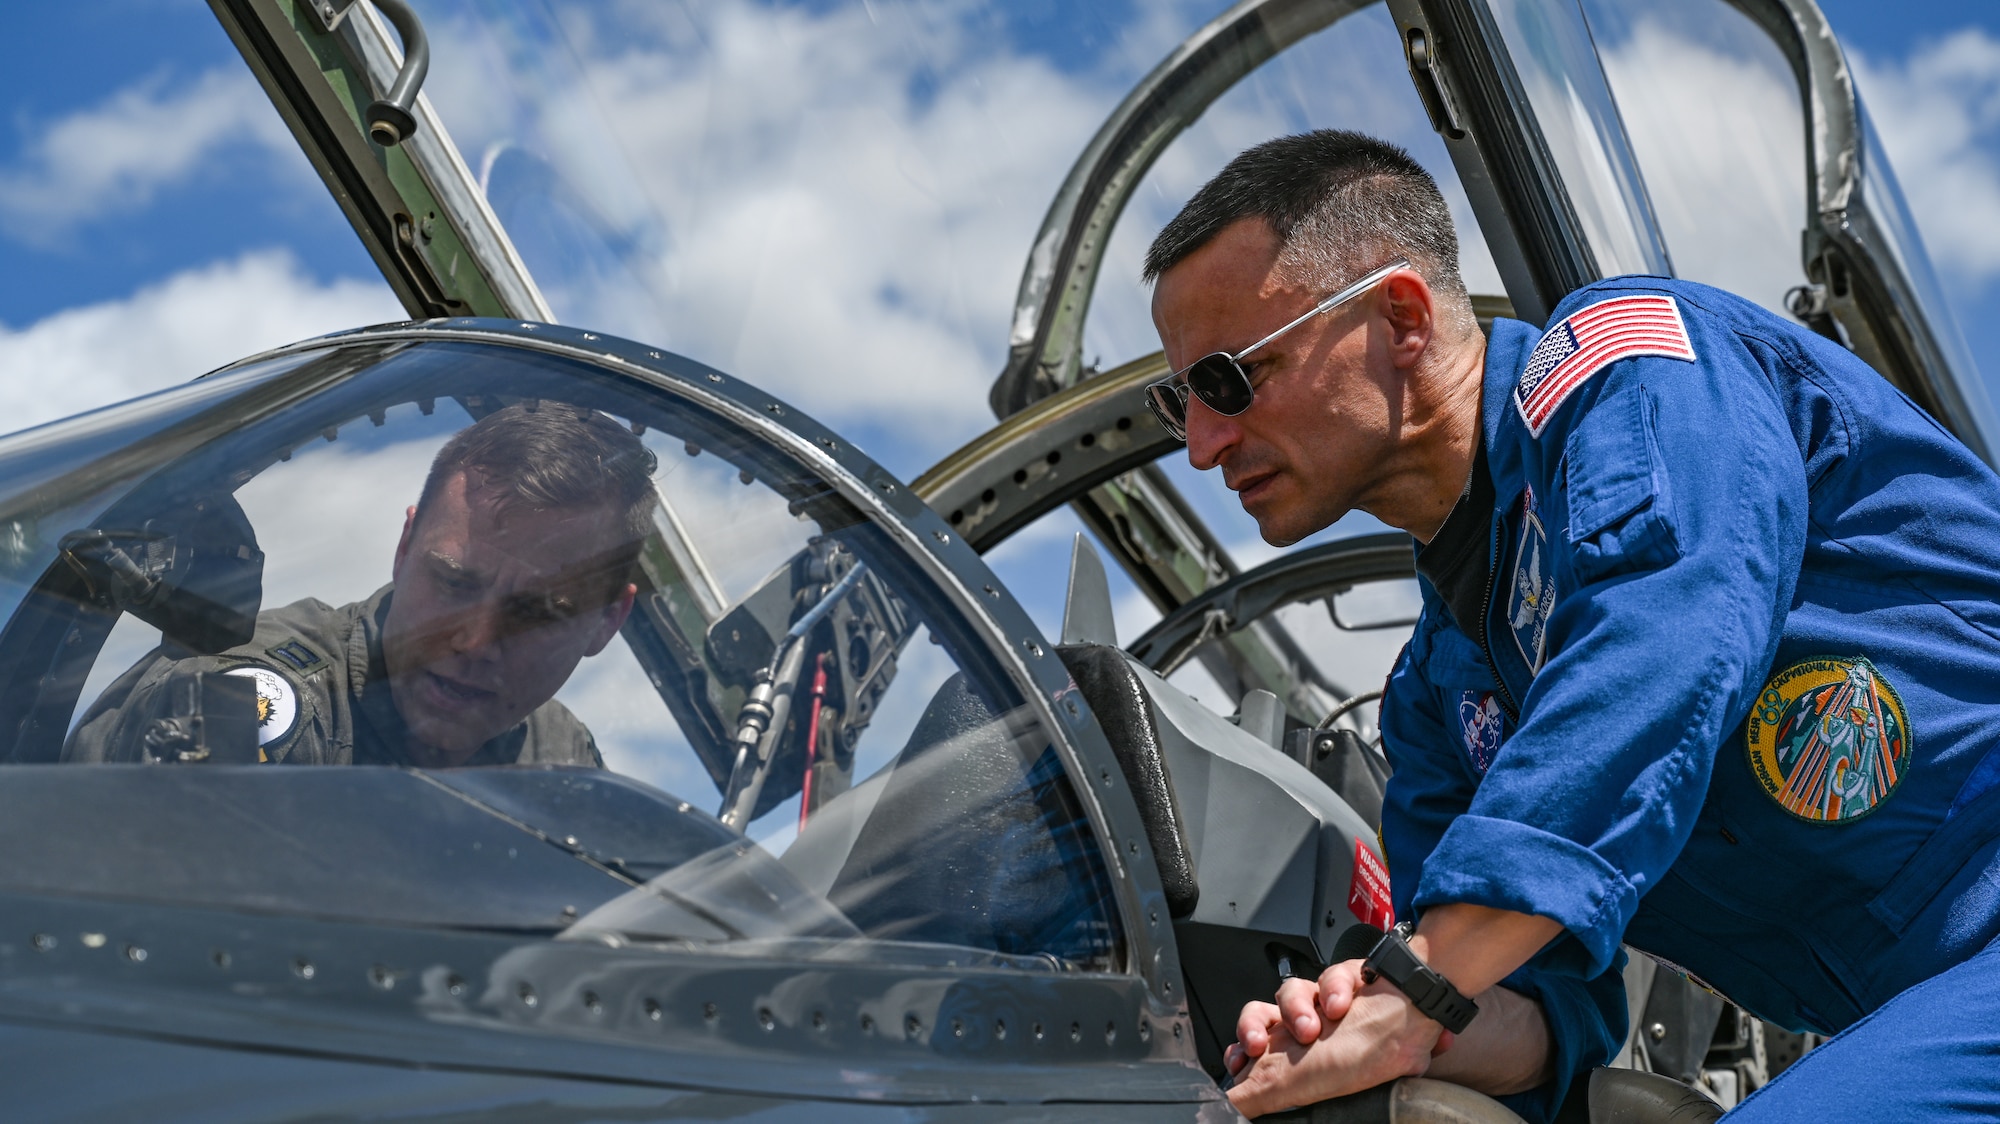 U.S. Army Col. Andrew Morgan, NASA astronaut and Army NASA Detachment commander and a B-2 Spirit pilot, discuss the T-38A Talon airframe at Whiteman Air Force Base, Missouri, June 7, 2022. NASA employs the T-38N Talon, which prepares astronauts and aircrews to respond to events that may jeopardize the mission. Both the 509th Bomb Wing and NASA utilize the trainer to ensure mission readiness.